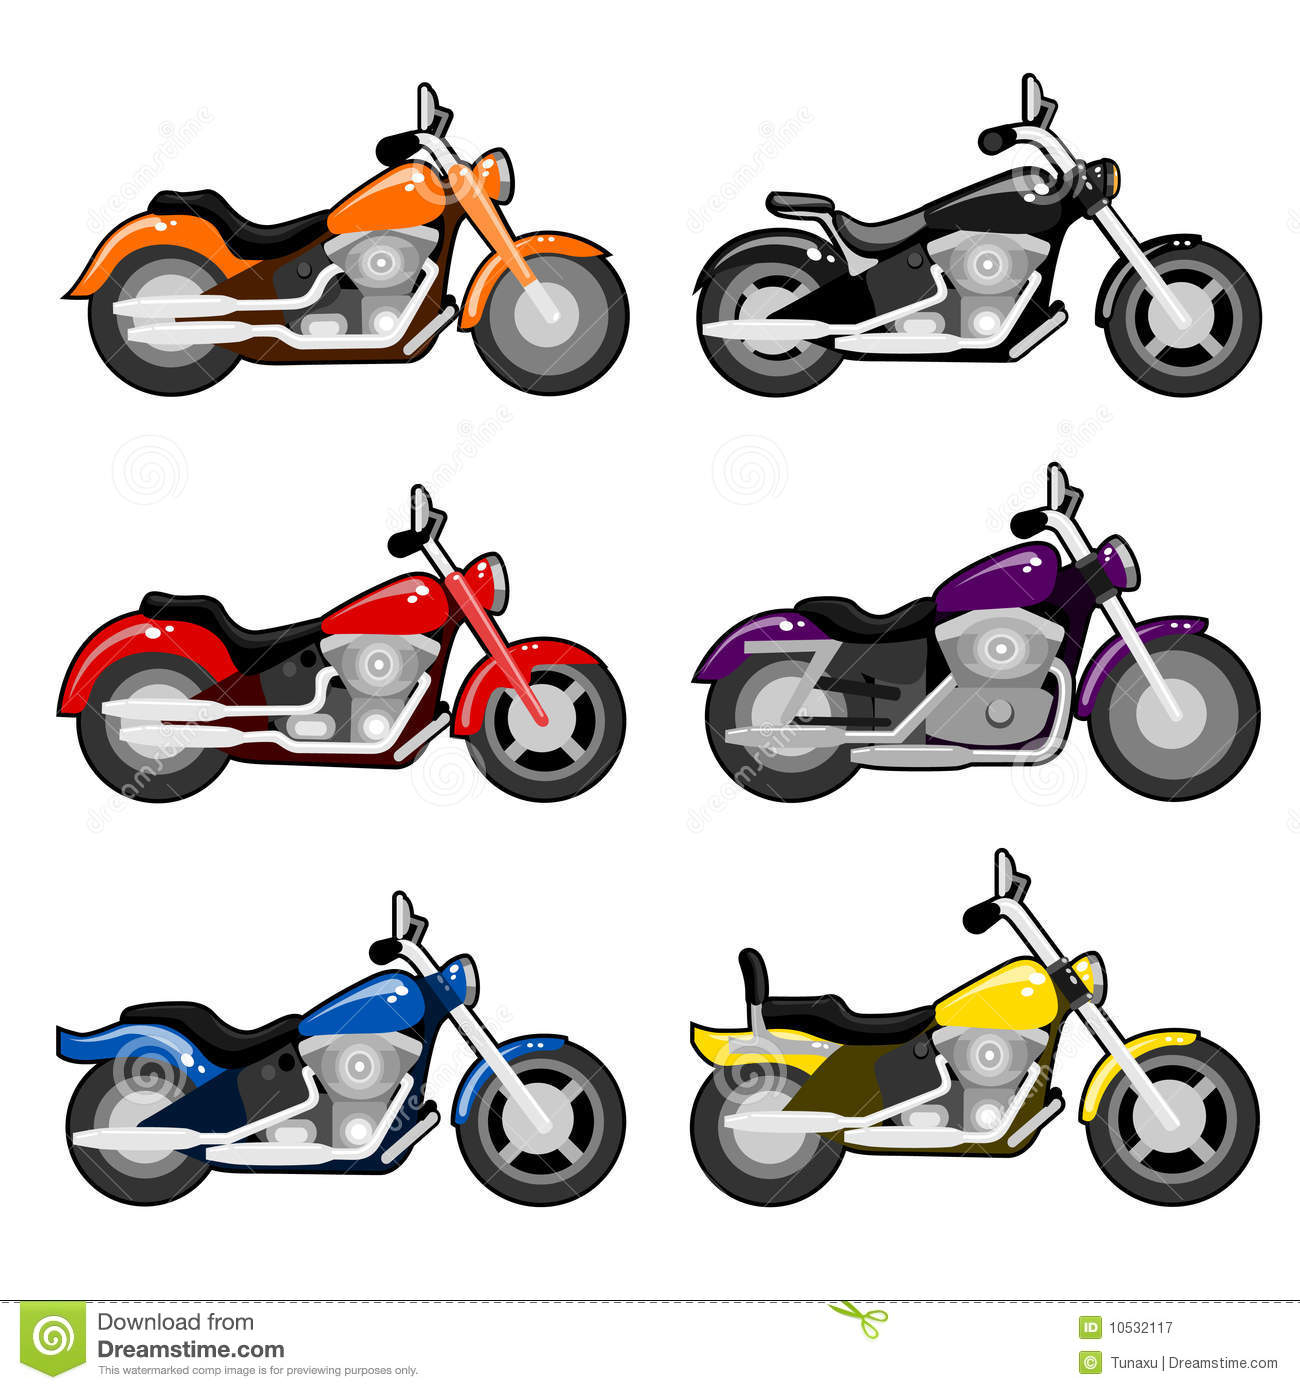 motorcycle clipart vector - photo #37